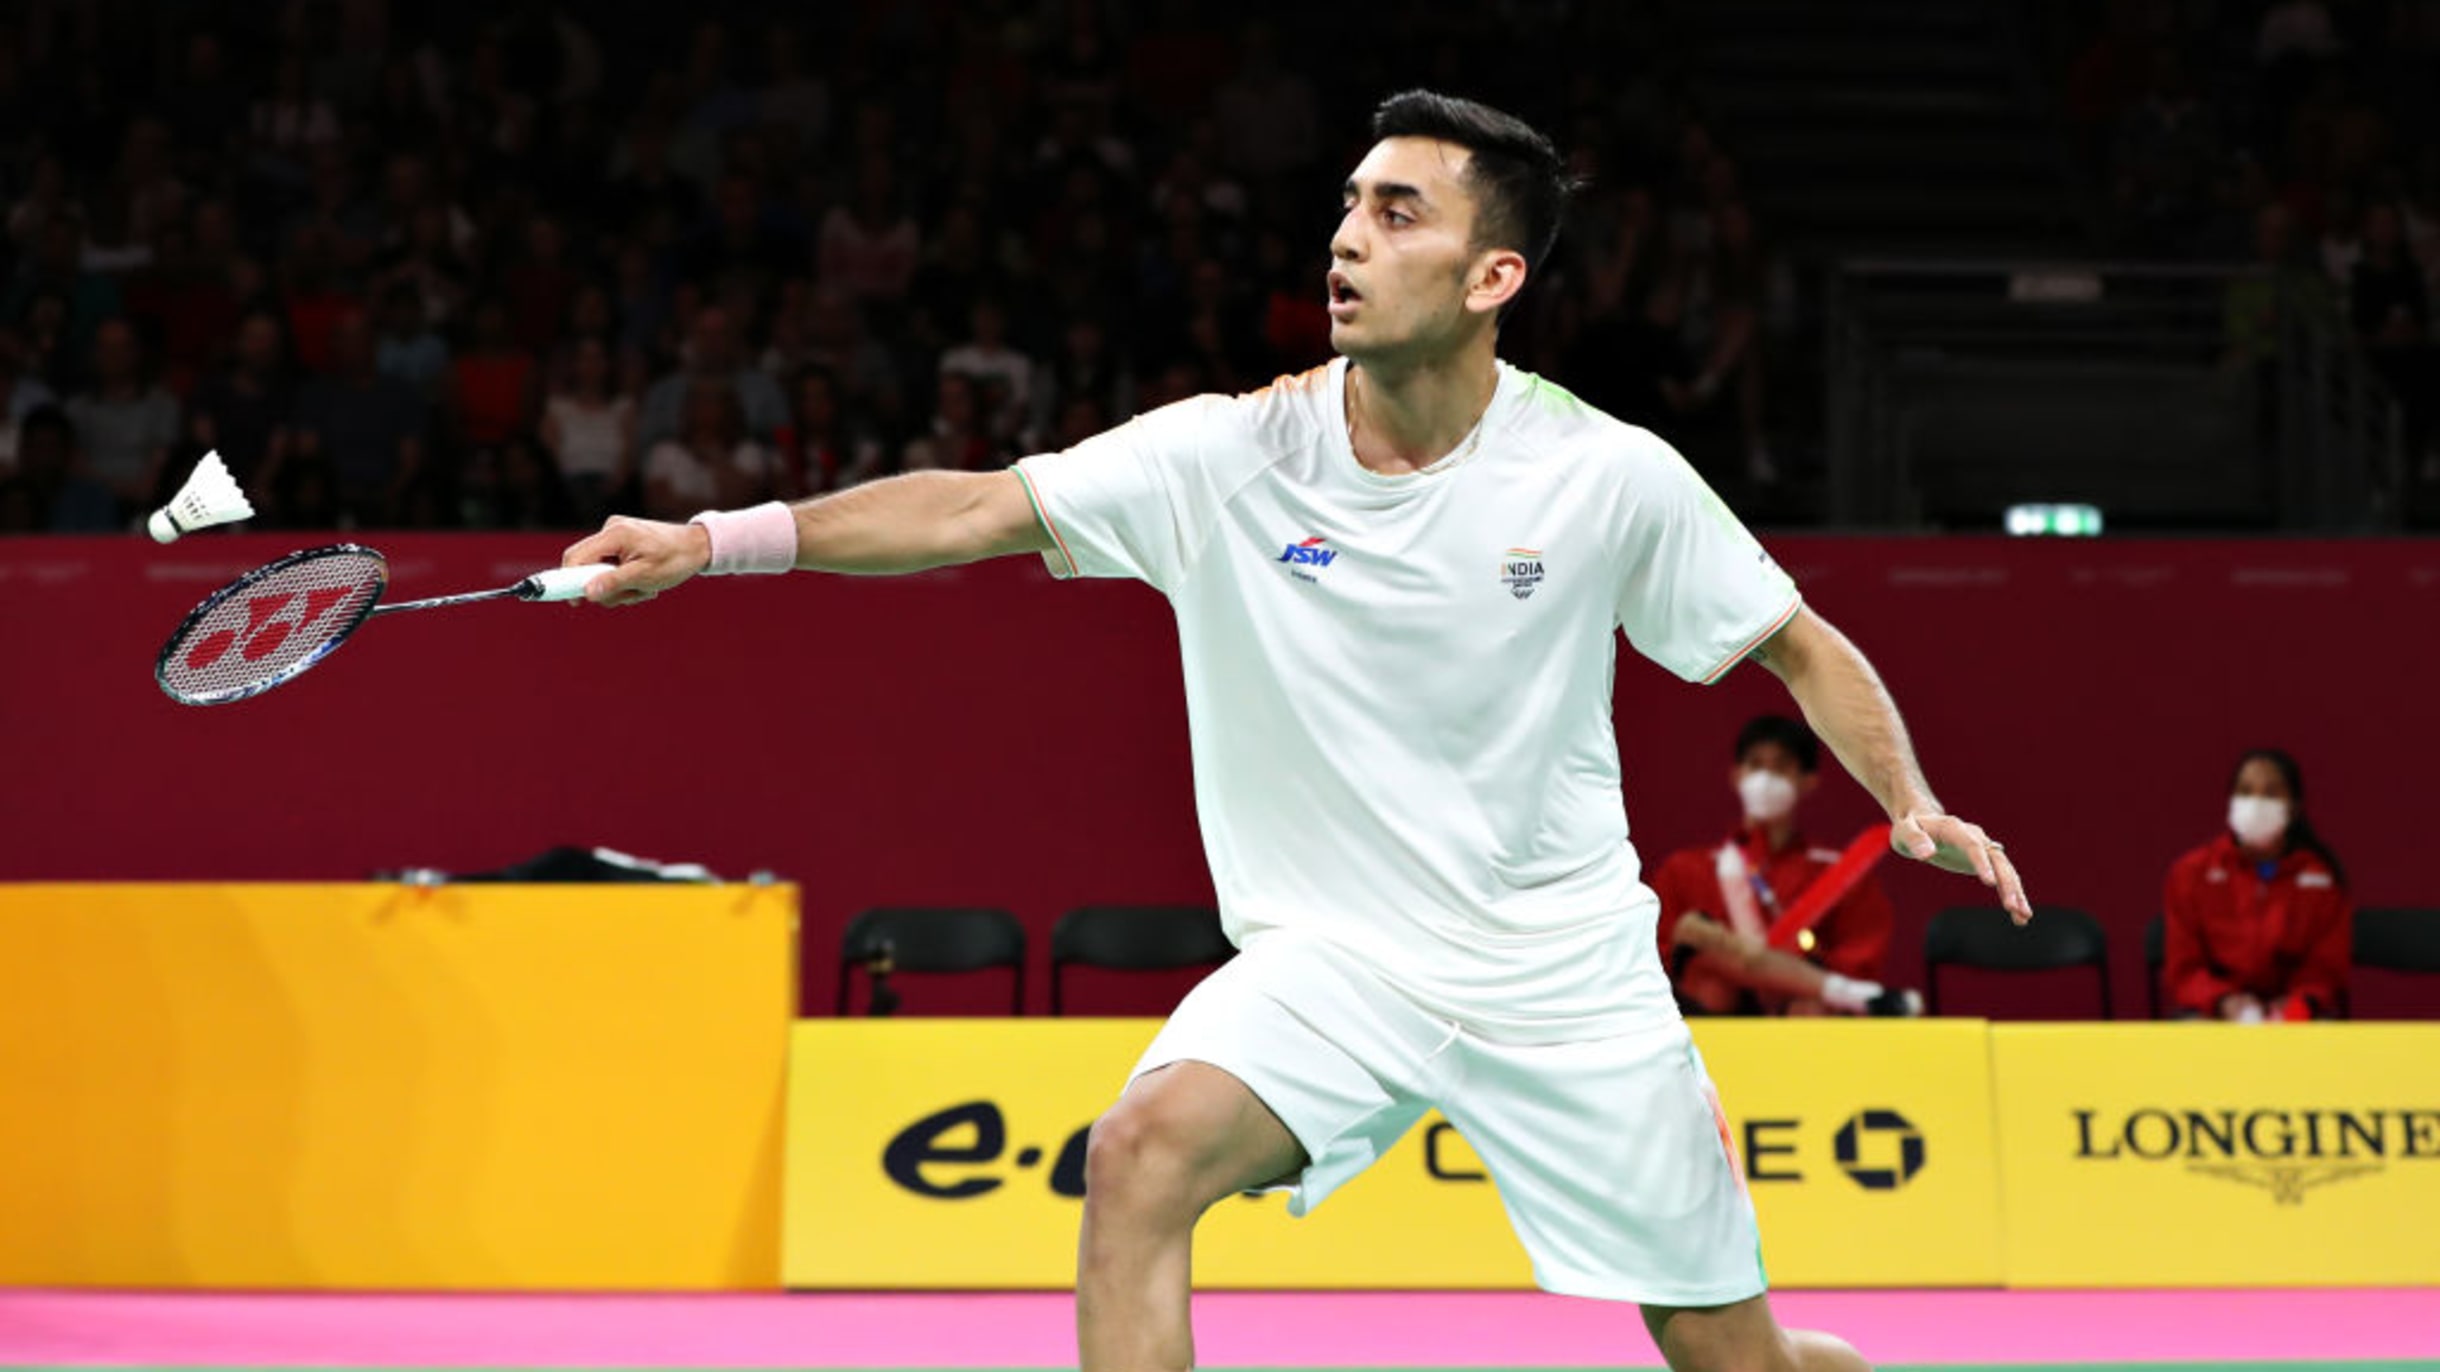 French Open 2022 badminton Watch live streaming and telecast in India